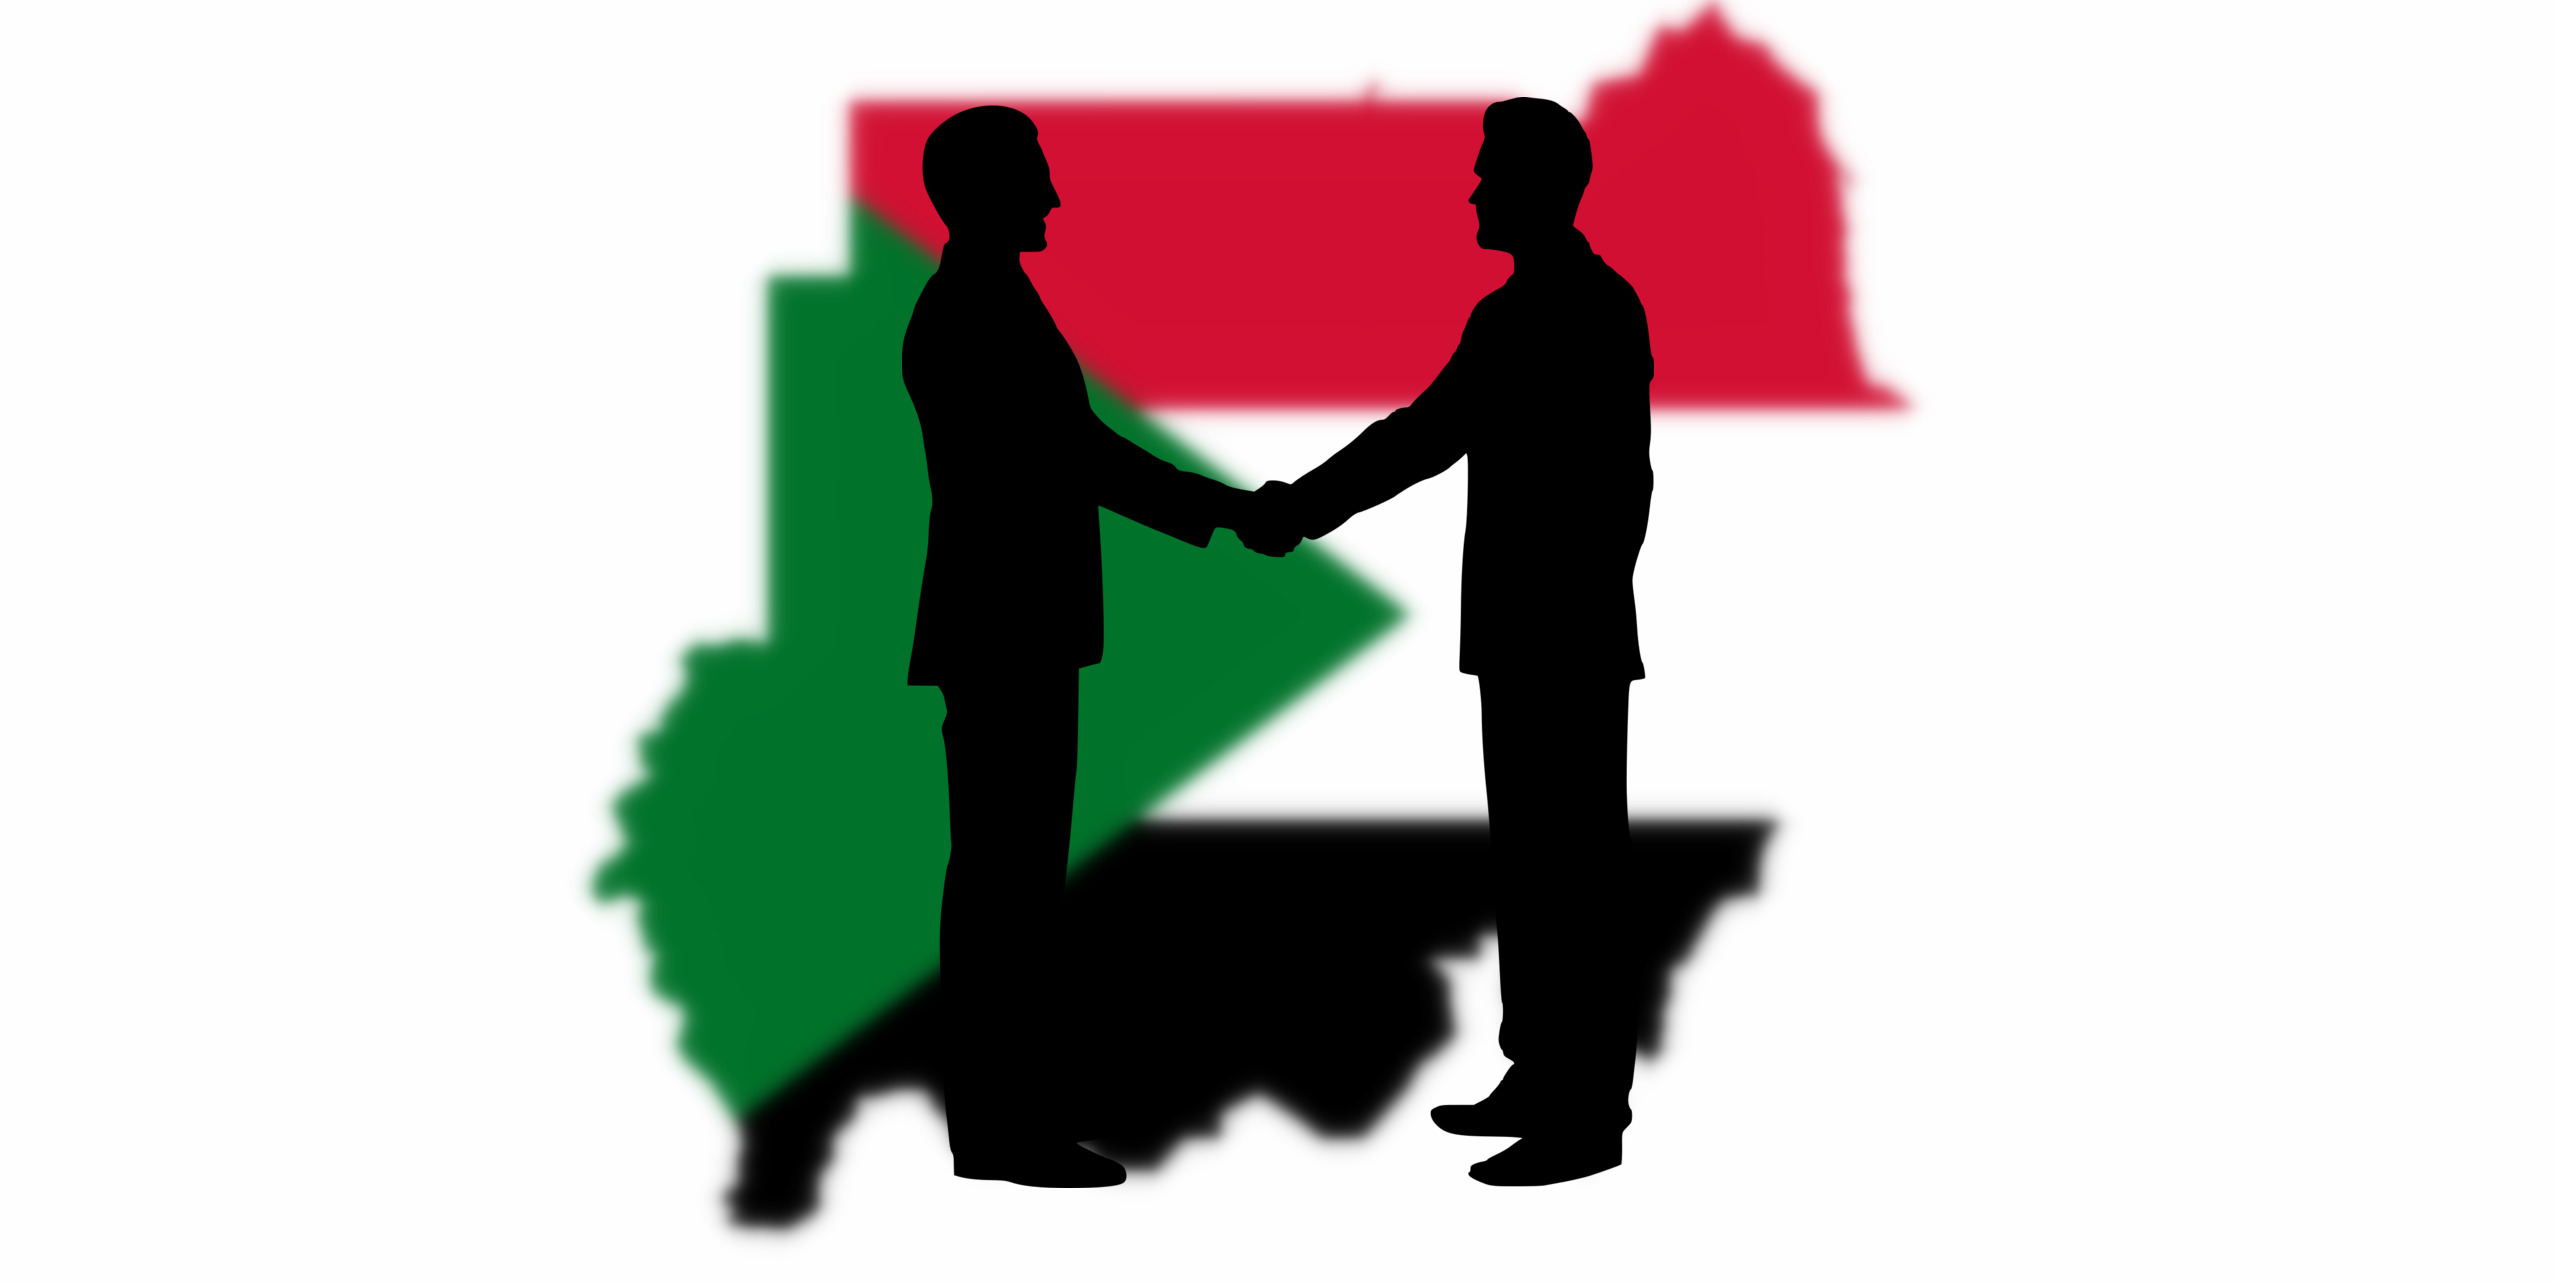 Sudan: Dialogue Now or Disaster To Come